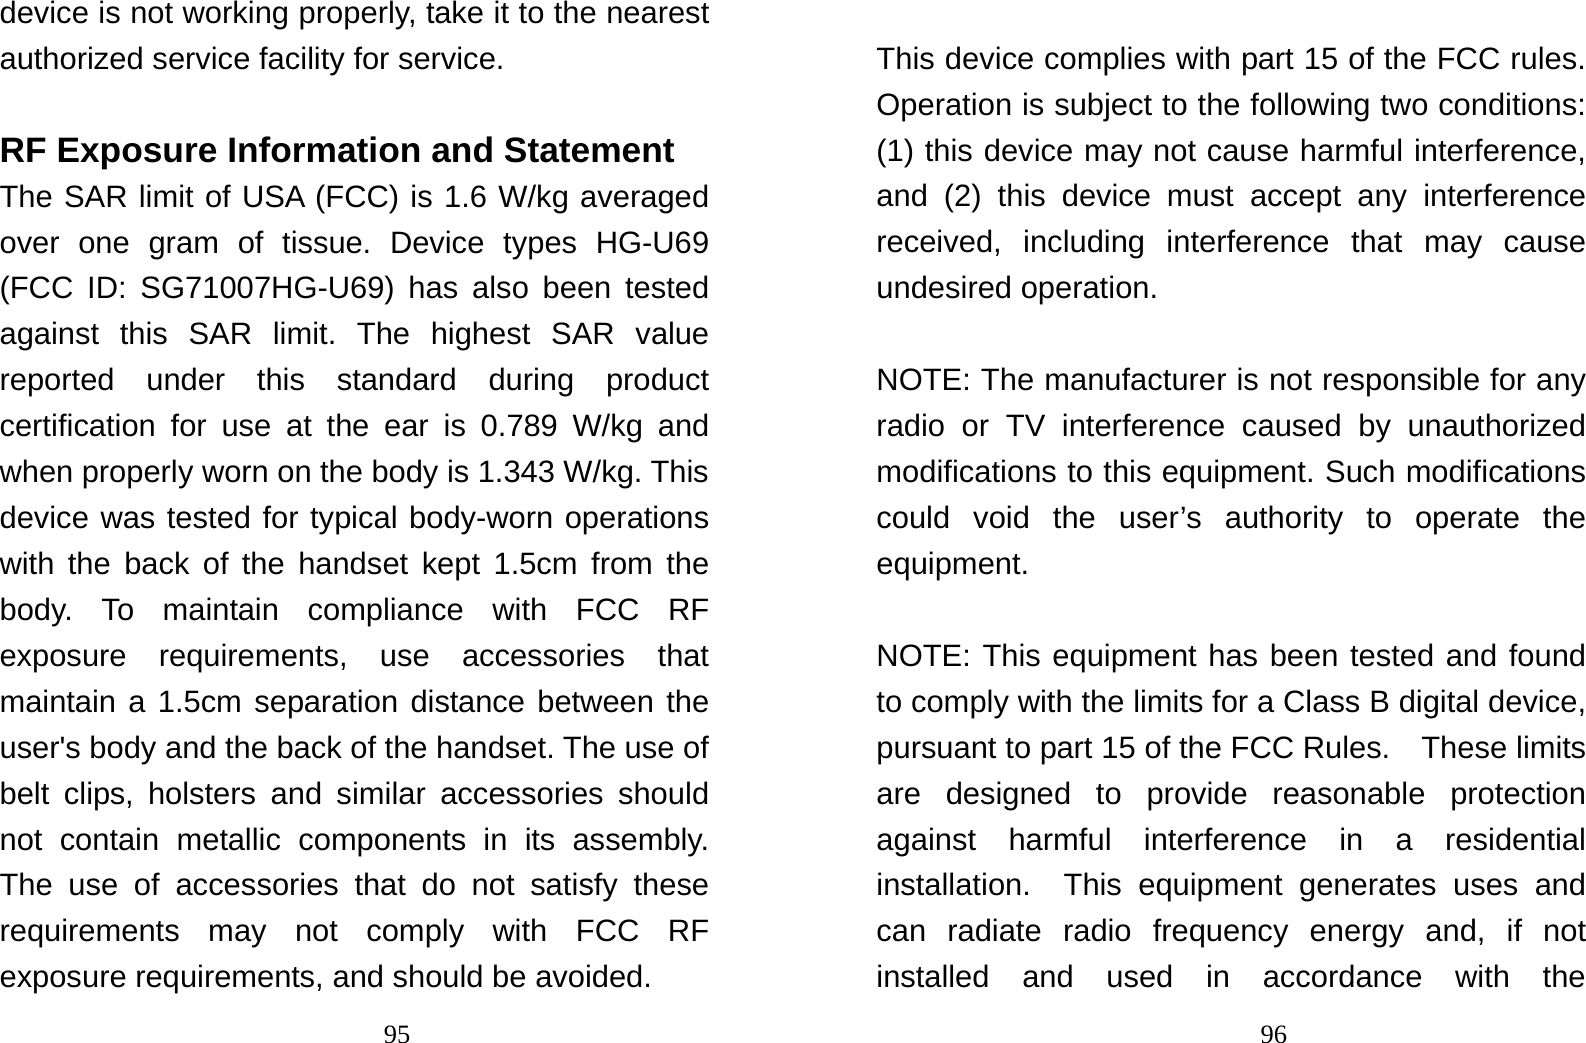                                95device is not working properly, take it to the nearest authorized service facility for service.  RF Exposure Information and Statement The SAR limit of USA (FCC) is 1.6 W/kg averaged over one gram of tissue. Device types HG-U69 (FCC ID: SG71007HG-U69) has also been tested against this SAR limit. The highest SAR value reported under this standard during product certification for use at the ear is 0.789 W/kg and when properly worn on the body is 1.343 W/kg. This device was tested for typical body-worn operations with the back of the handset kept 1.5cm from the body. To maintain compliance with FCC RF exposure requirements, use accessories that maintain a 1.5cm separation distance between the user&apos;s body and the back of the handset. The use of belt clips, holsters and similar accessories should not contain metallic components in its assembly. The use of accessories that do not satisfy these requirements may not comply with FCC RF exposure requirements, and should be avoided.                                96 This device complies with part 15 of the FCC rules. Operation is subject to the following two conditions: (1) this device may not cause harmful interference, and (2) this device must accept any interference received, including interference that may cause undesired operation.  NOTE: The manufacturer is not responsible for any radio or TV interference caused by unauthorized modifications to this equipment. Such modifications could void the user’s authority to operate the equipment.  NOTE: This equipment has been tested and found to comply with the limits for a Class B digital device, pursuant to part 15 of the FCC Rules.    These limits are designed to provide reasonable protection against harmful interference in a residential installation.  This equipment generates uses and can radiate radio frequency energy and, if not installed and used in accordance with the 